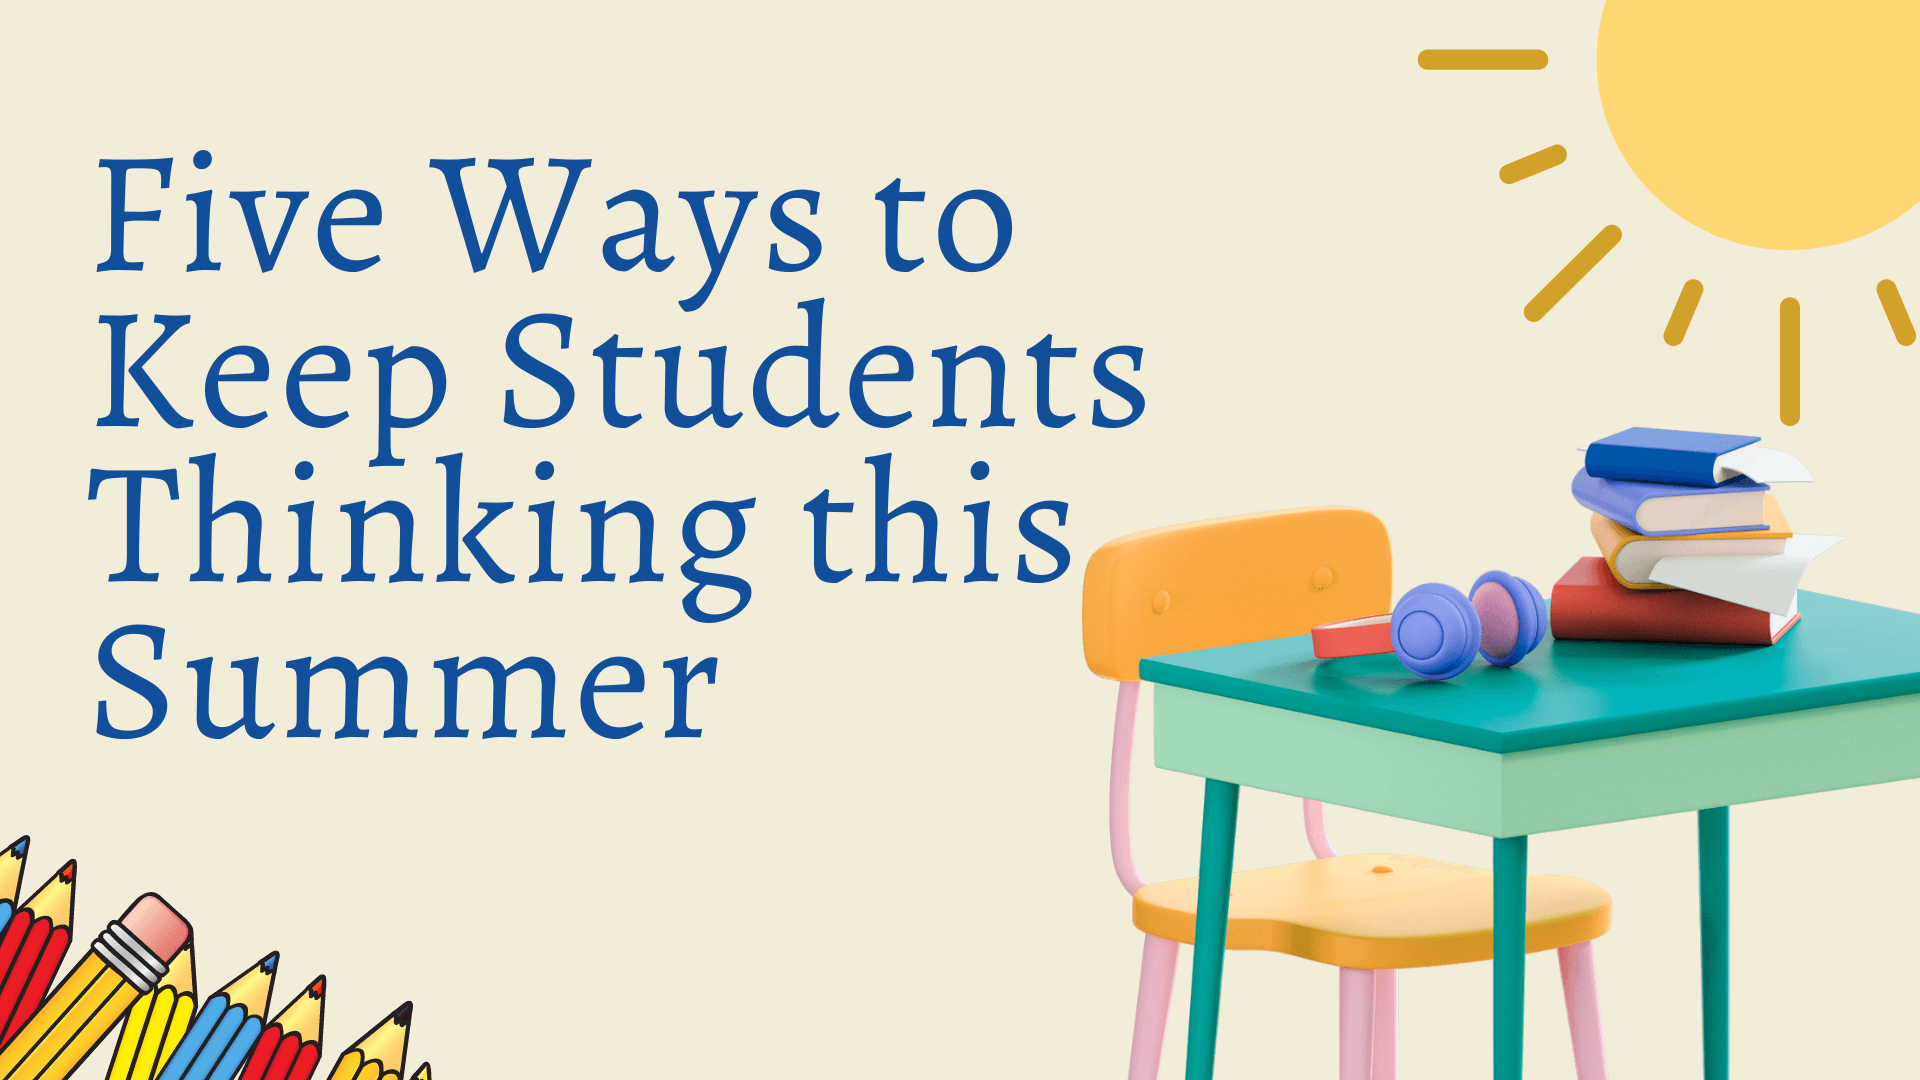 Five Ways to Keep Students Thinking this Summer graphic